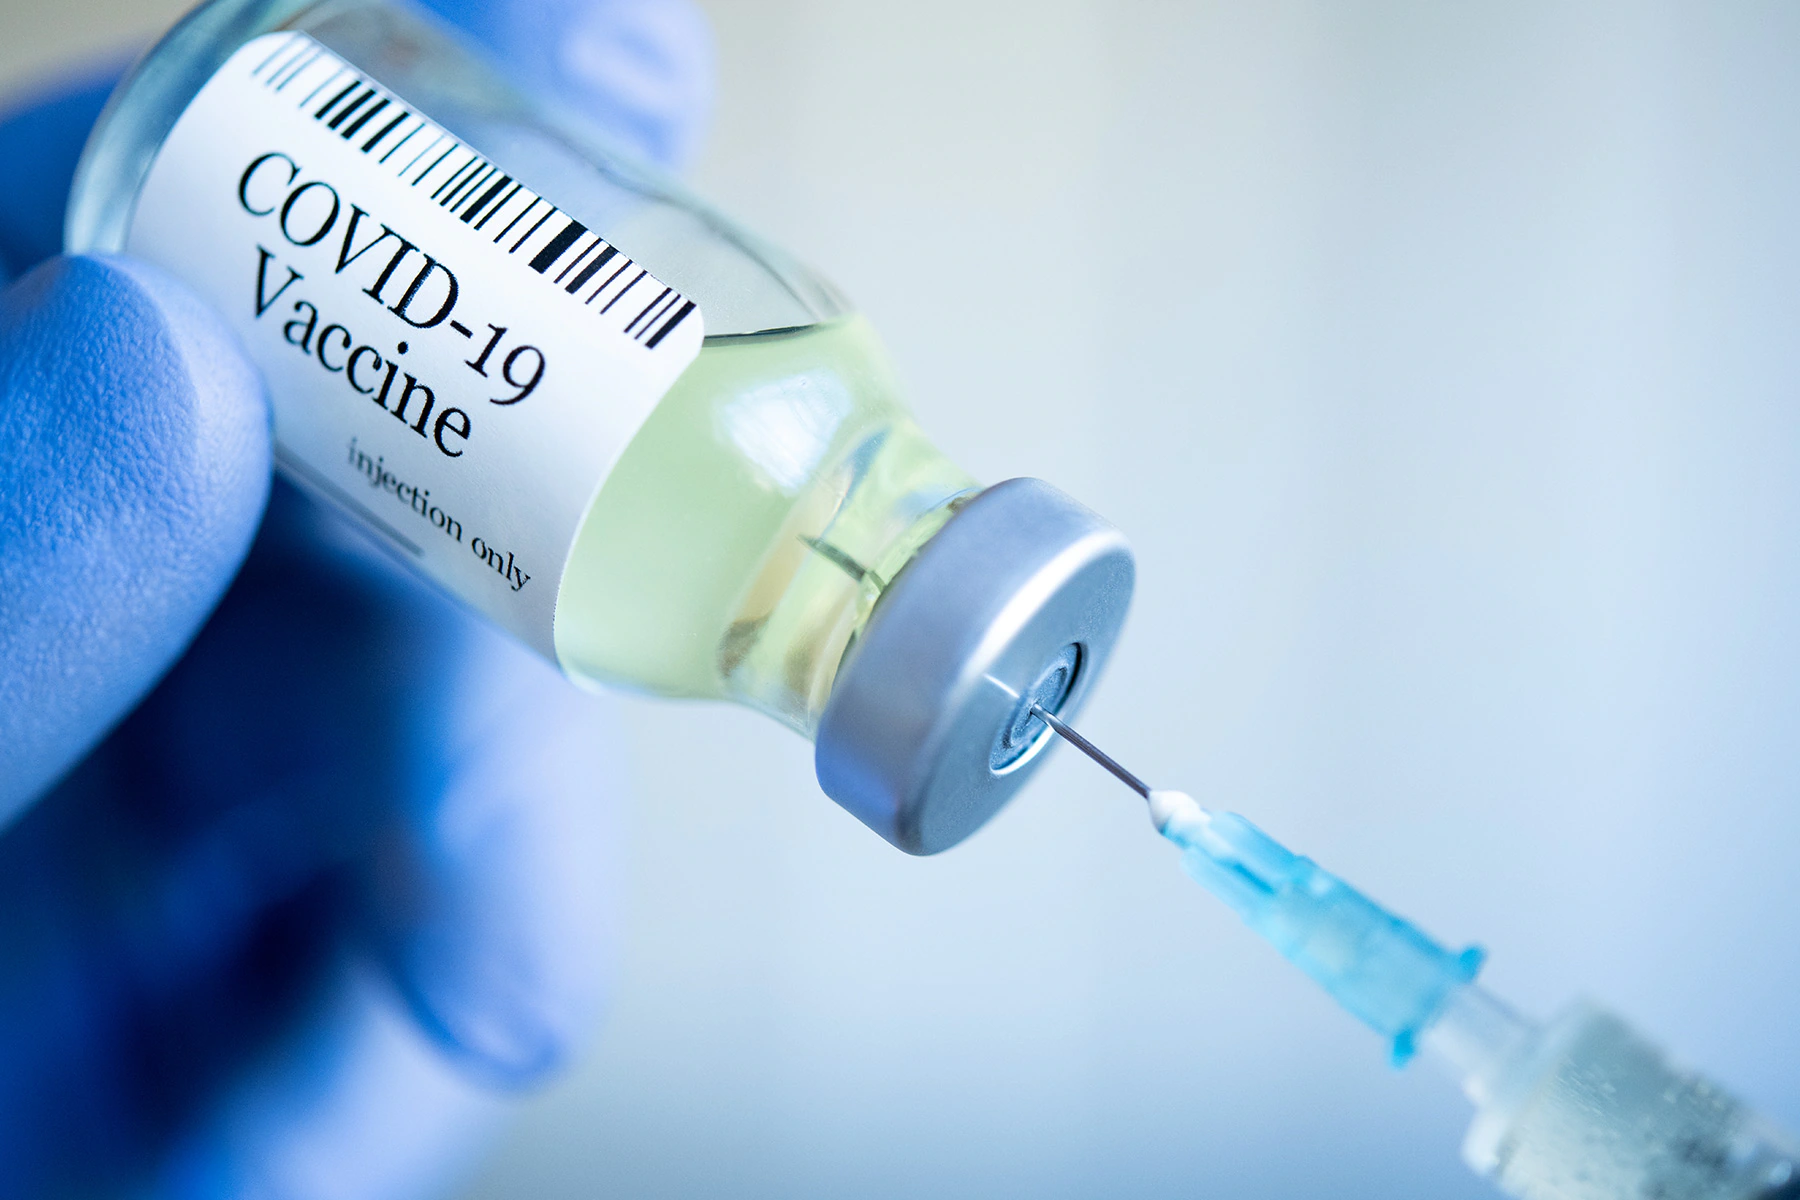 Sanatorium Workers Fired, Resign Over Vaccine Policy